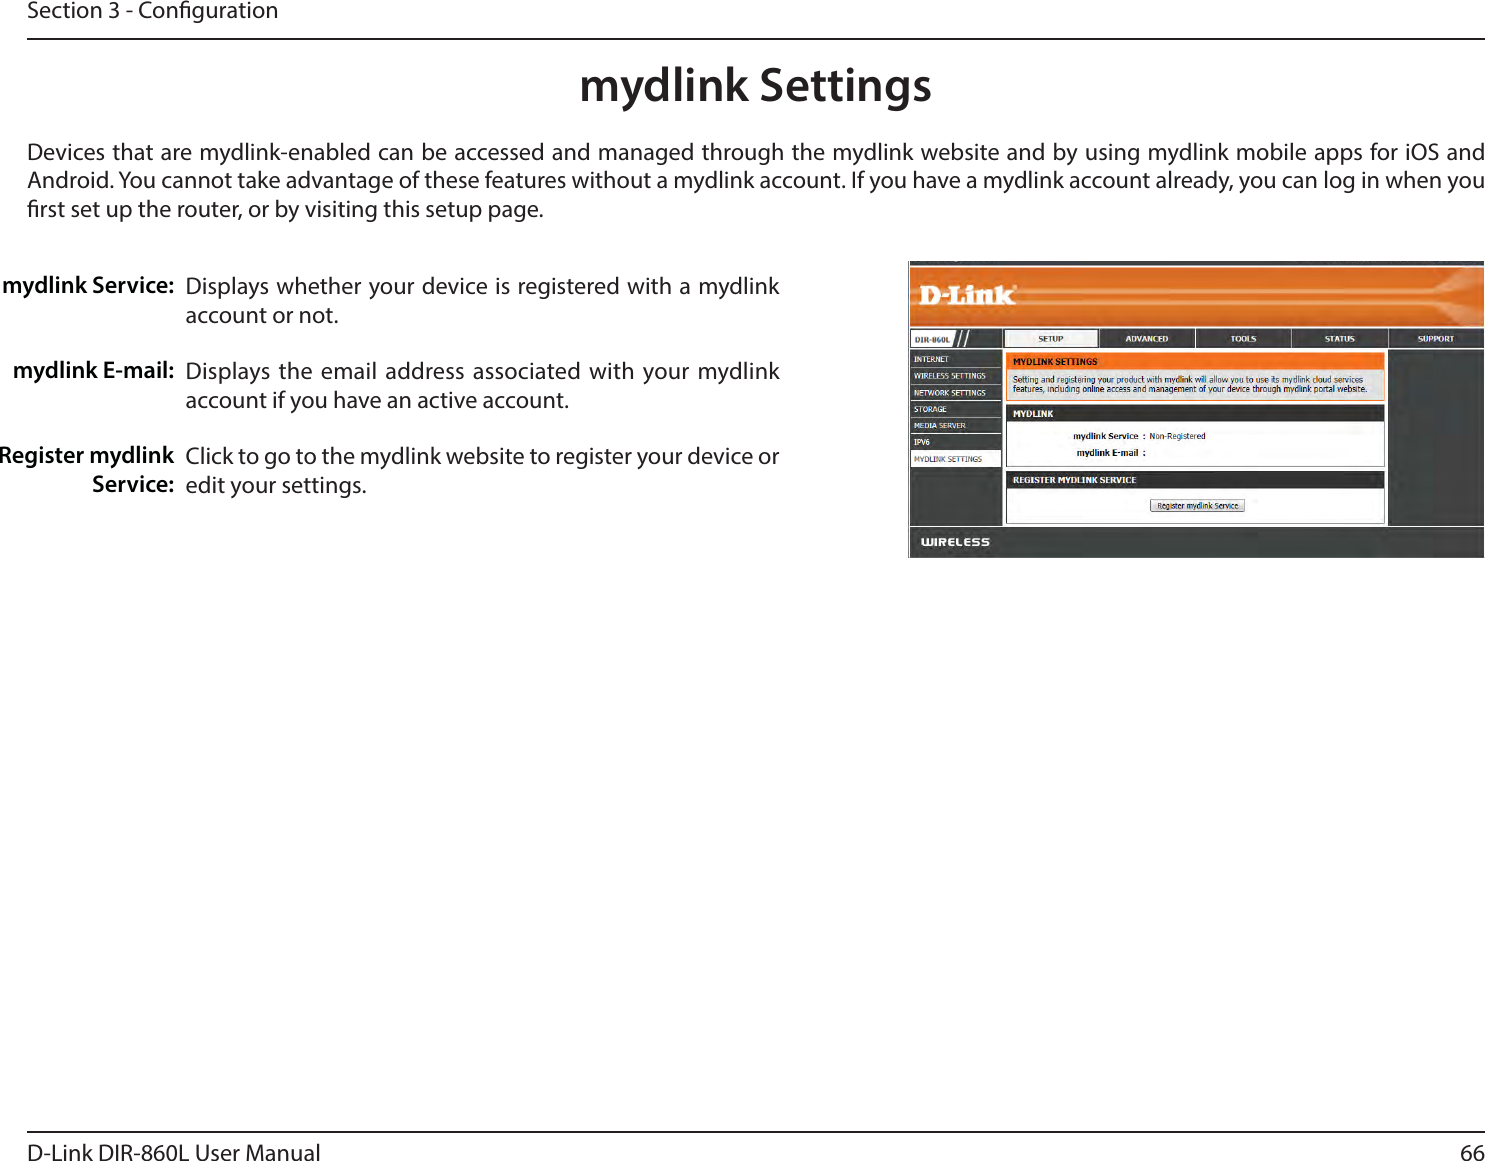 66D-Link DIR-860L User ManualSection 3 - Congurationmydlink SettingsDisplays whether your device is registered with a mydlink account or not.Displays the email address associated with your mydlink account if you have an active account.Click to go to the mydlink website to register your device or edit your settings.mydlink Service:mydlink E-mail:Register mydlink Service:Devices that are mydlink-enabled can be accessed and managed through the mydlink website and by using mydlink mobile apps for iOS and Android. You cannot take advantage of these features without a mydlink account. If you have a mydlink account already, you can log in when you rst set up the router, or by visiting this setup page.